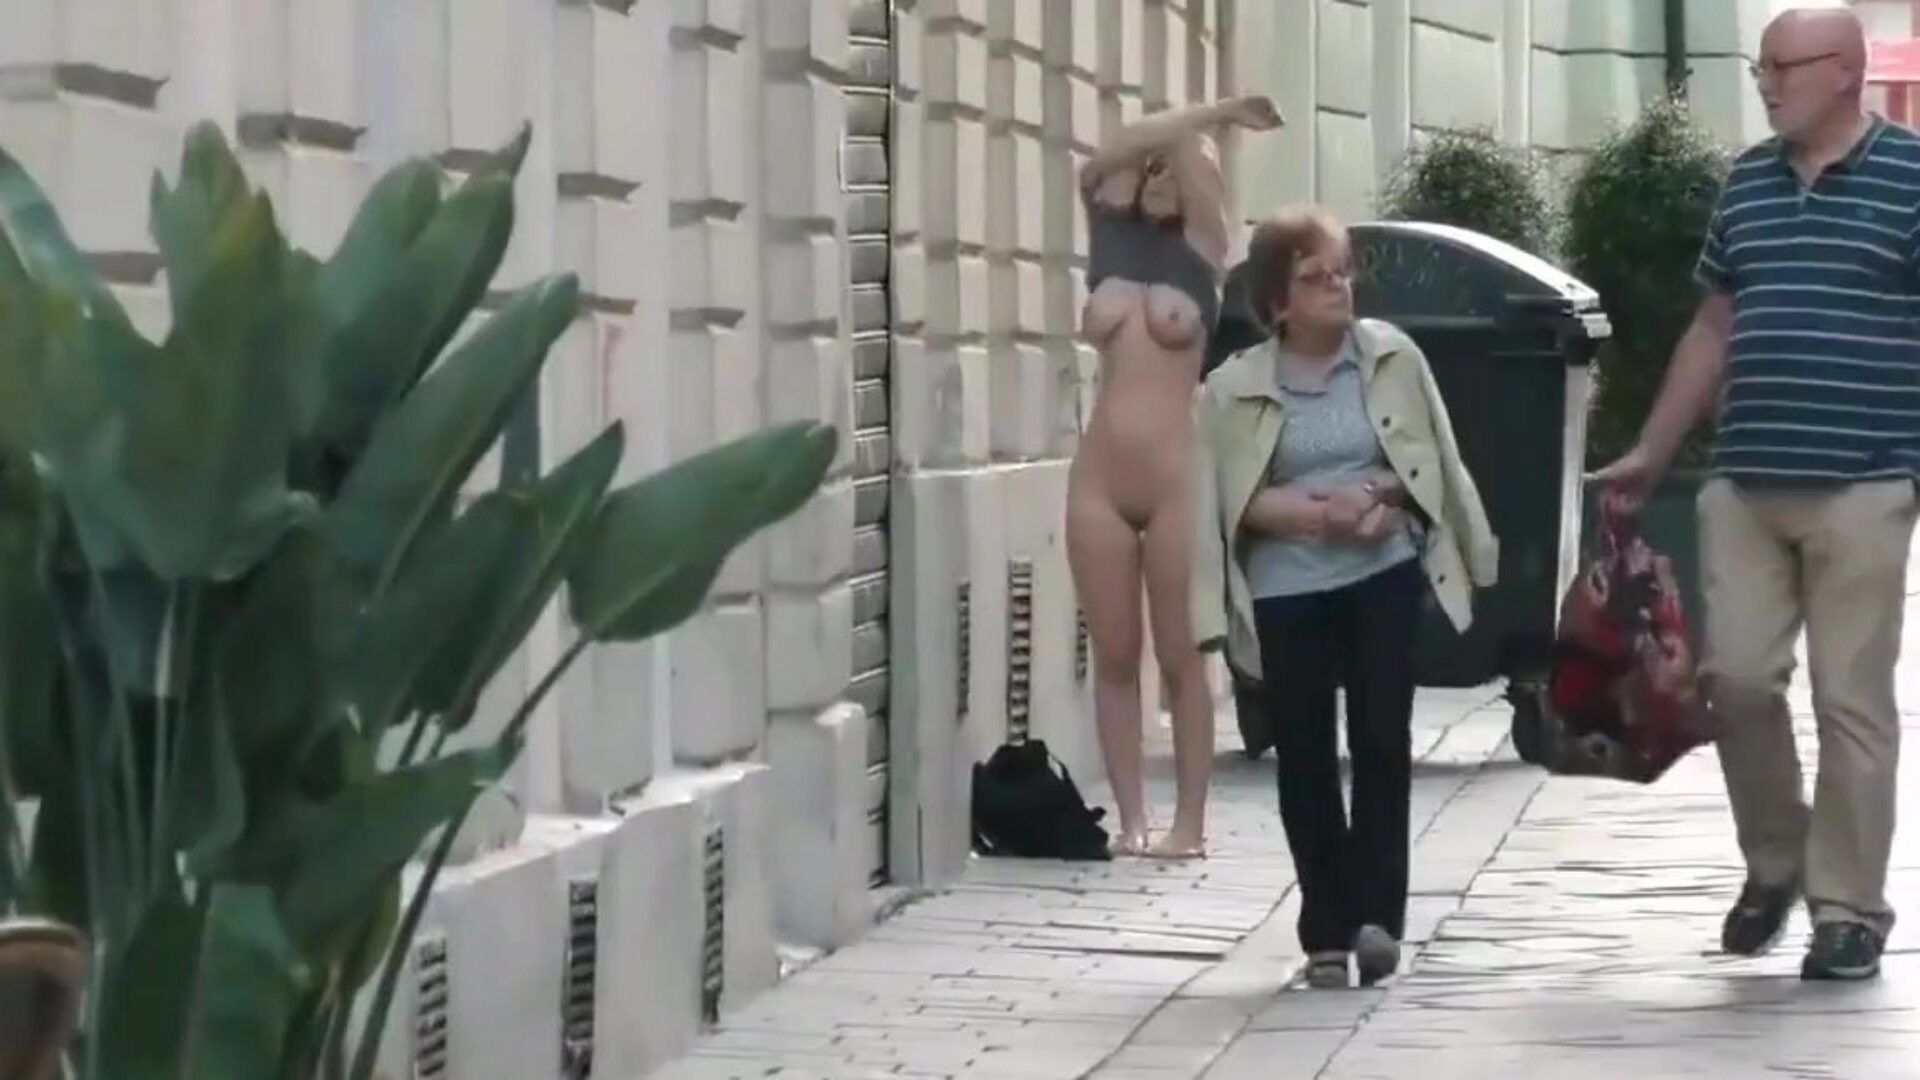 Beautiful Girl Naked in Public, Free Beeg Beautiful HD Porn Watch Beautiful Girl Naked in Public clip on xHamster, the hottest HD fuck-fest tube website with tons of free Beeg Beautiful & Xxx Public porn videos